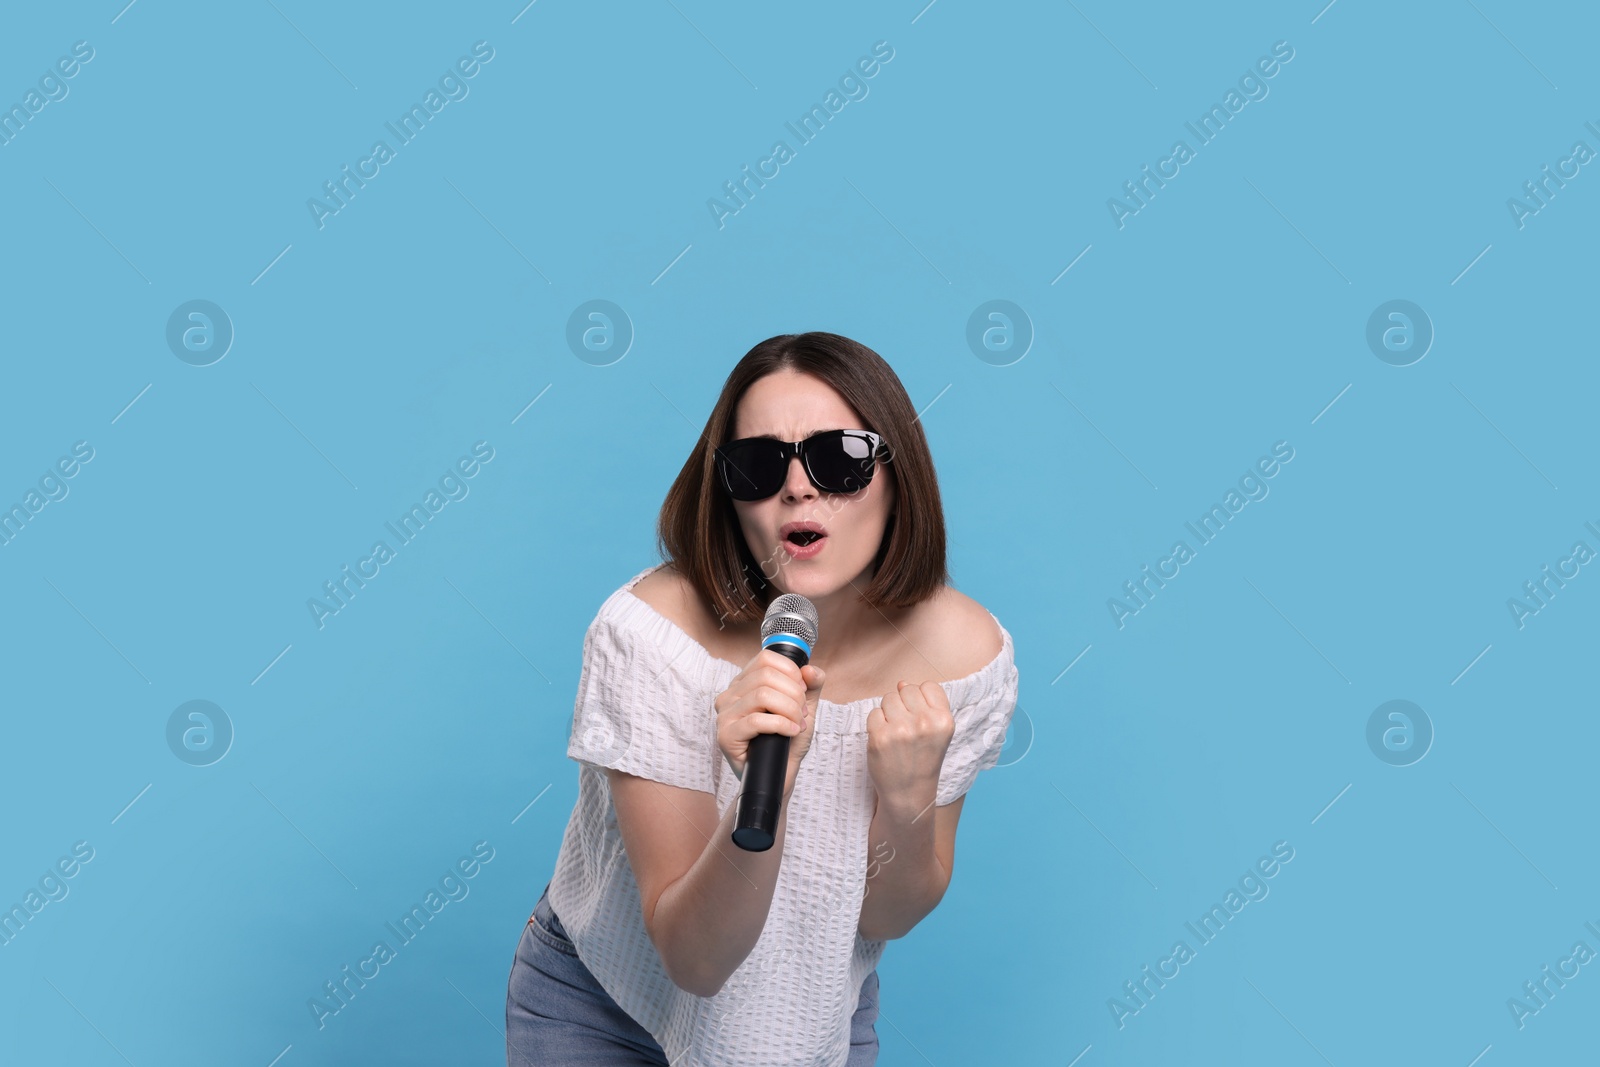 Photo of Beautiful young woman with sunglasses and microphone singing on light blue background